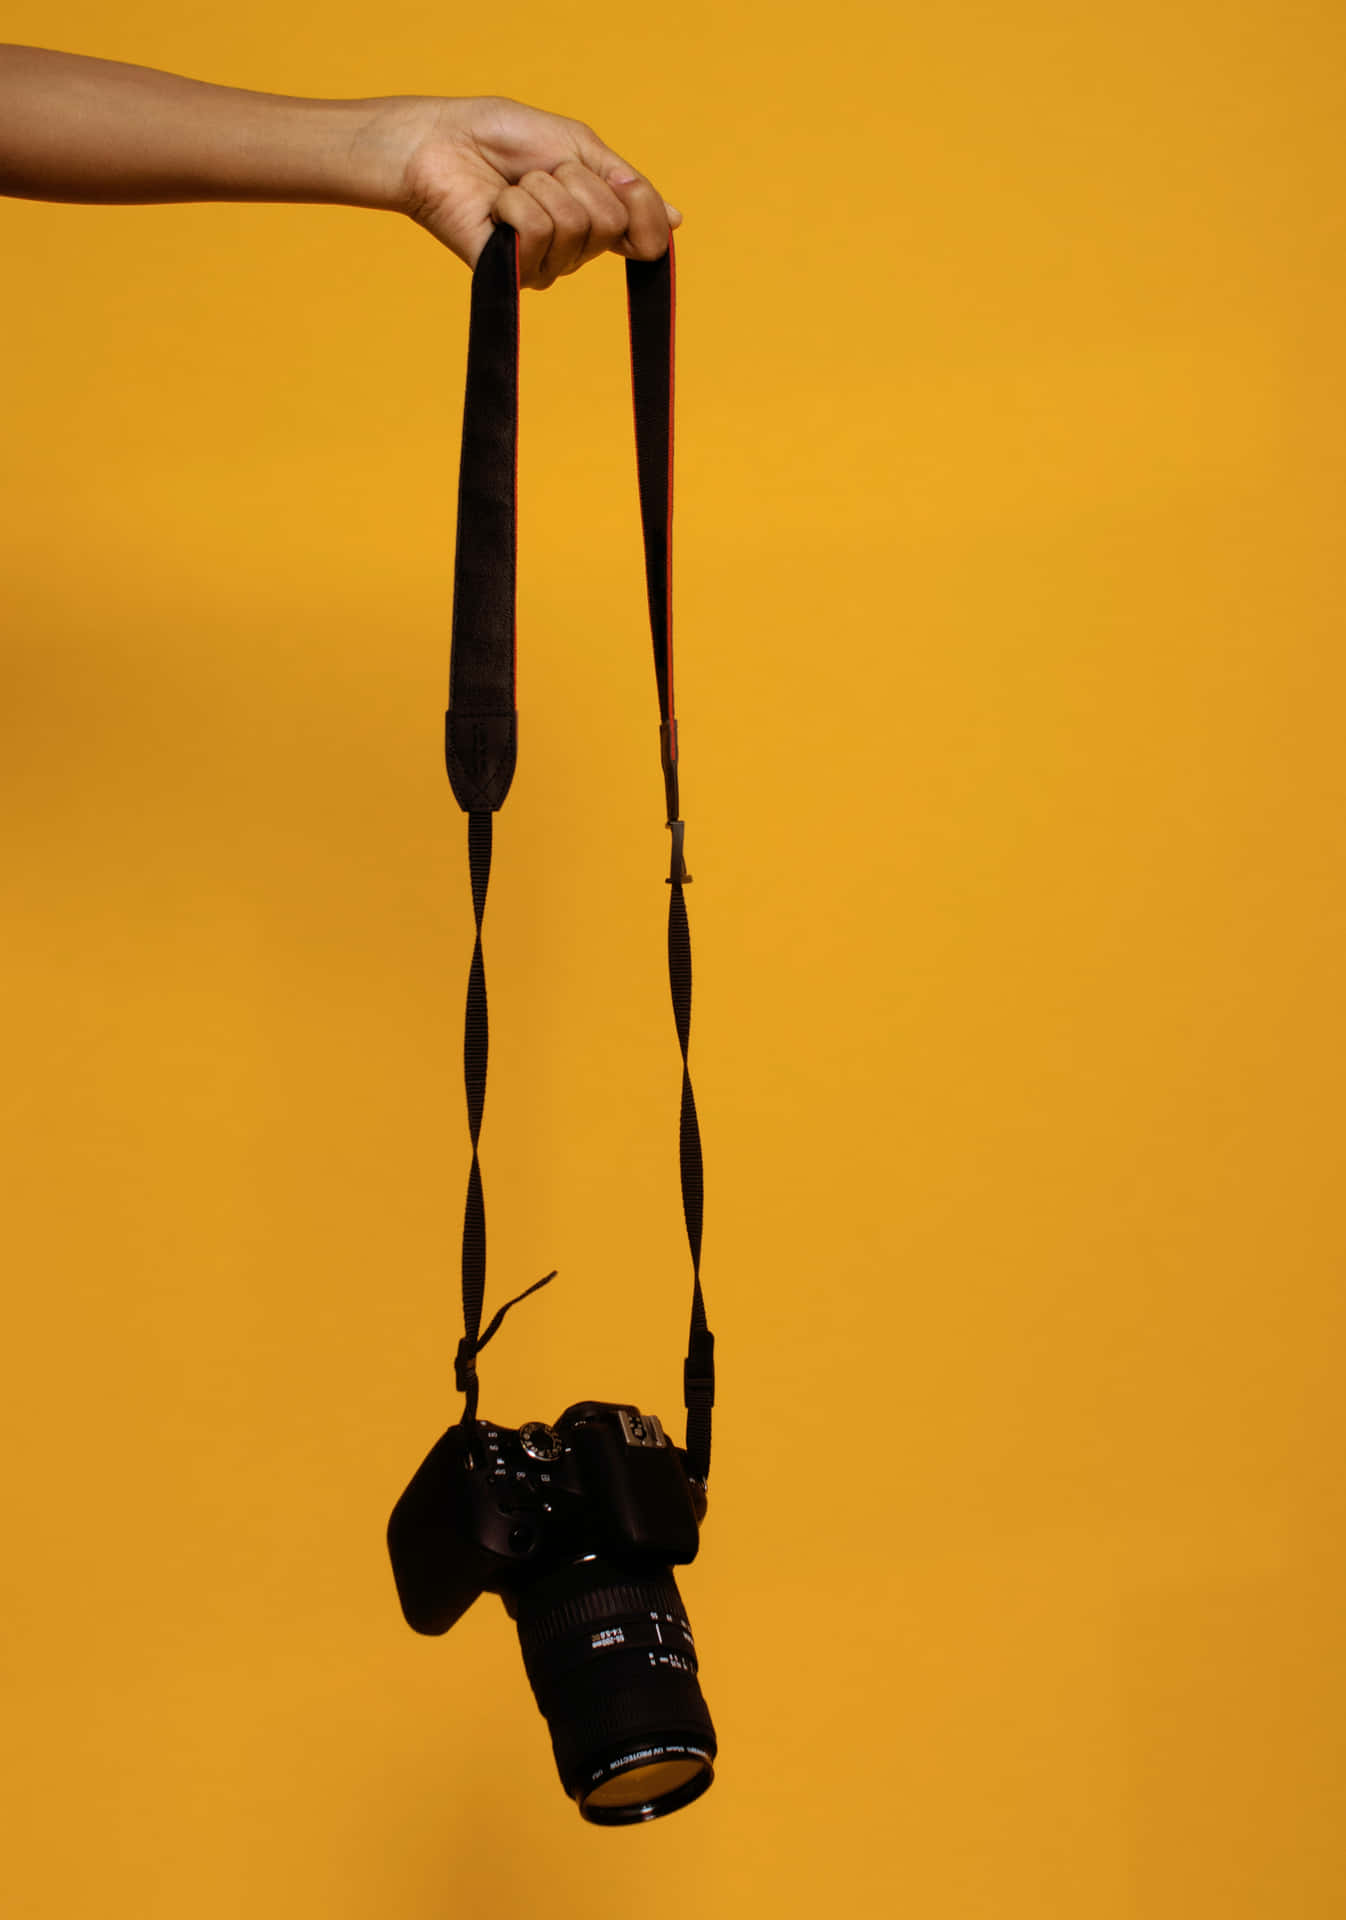 DSLR Camera With Strap Yellow Background